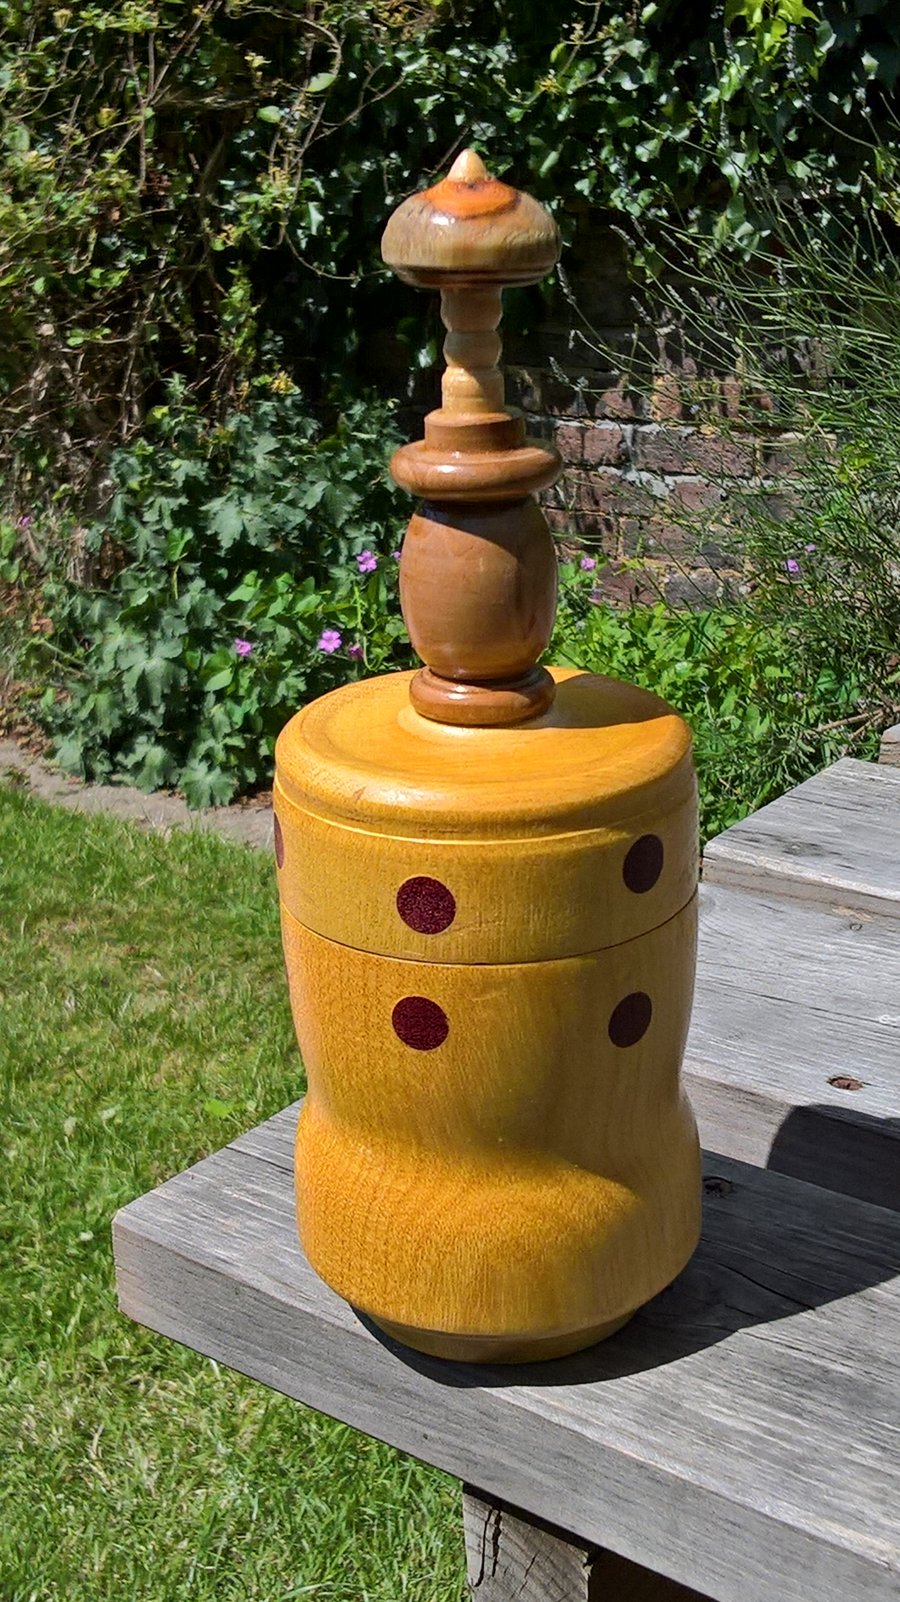  A yellow wooden pot with an orange yew finial and purple dots